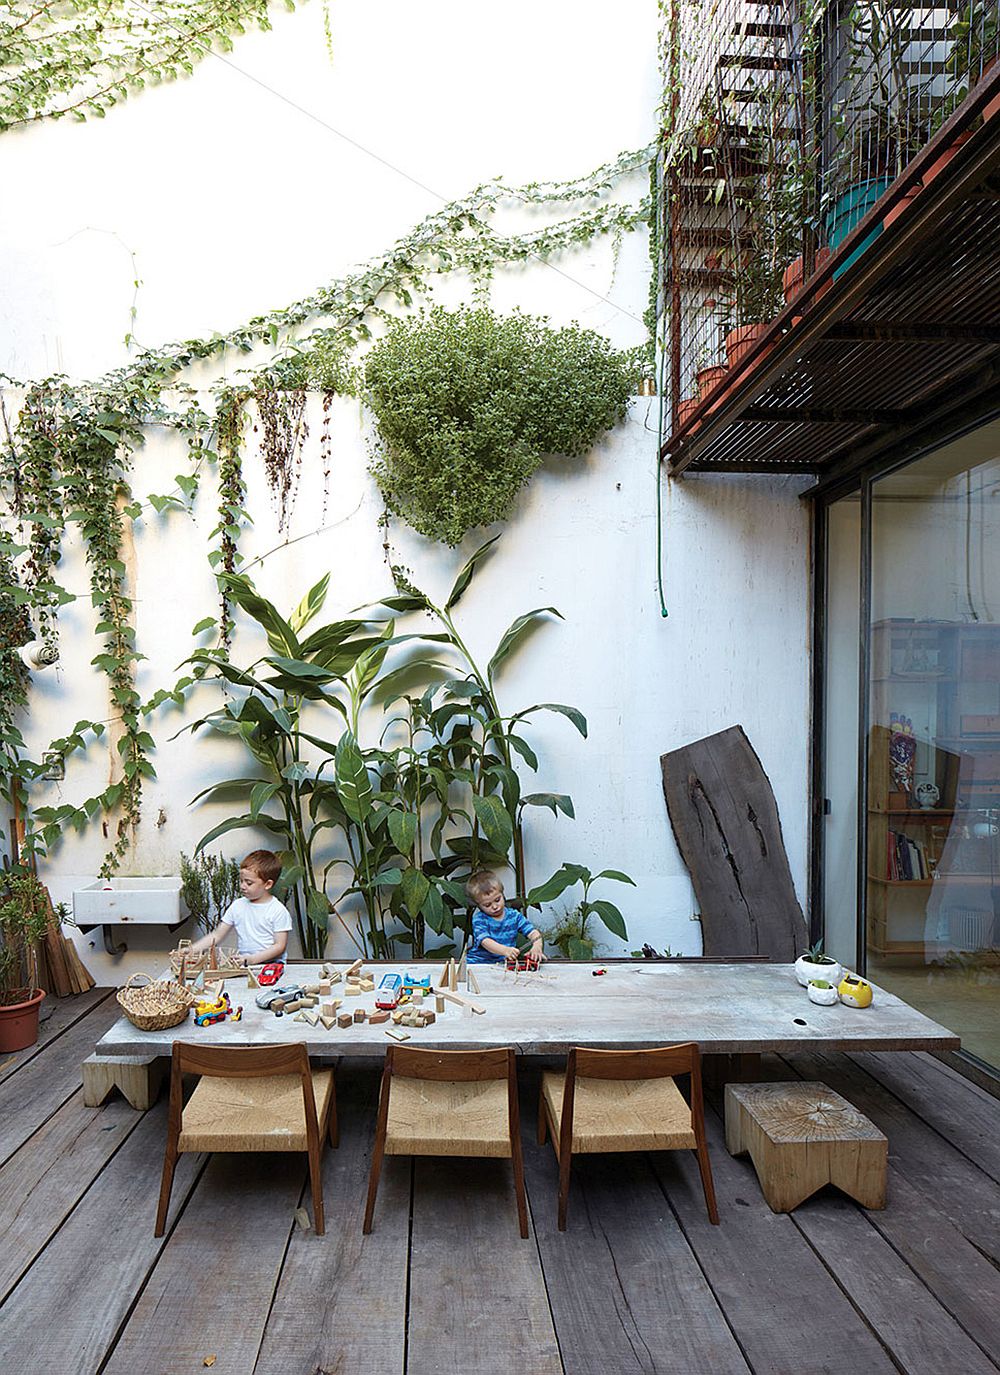 Outdoor dining area surrounded by greenery